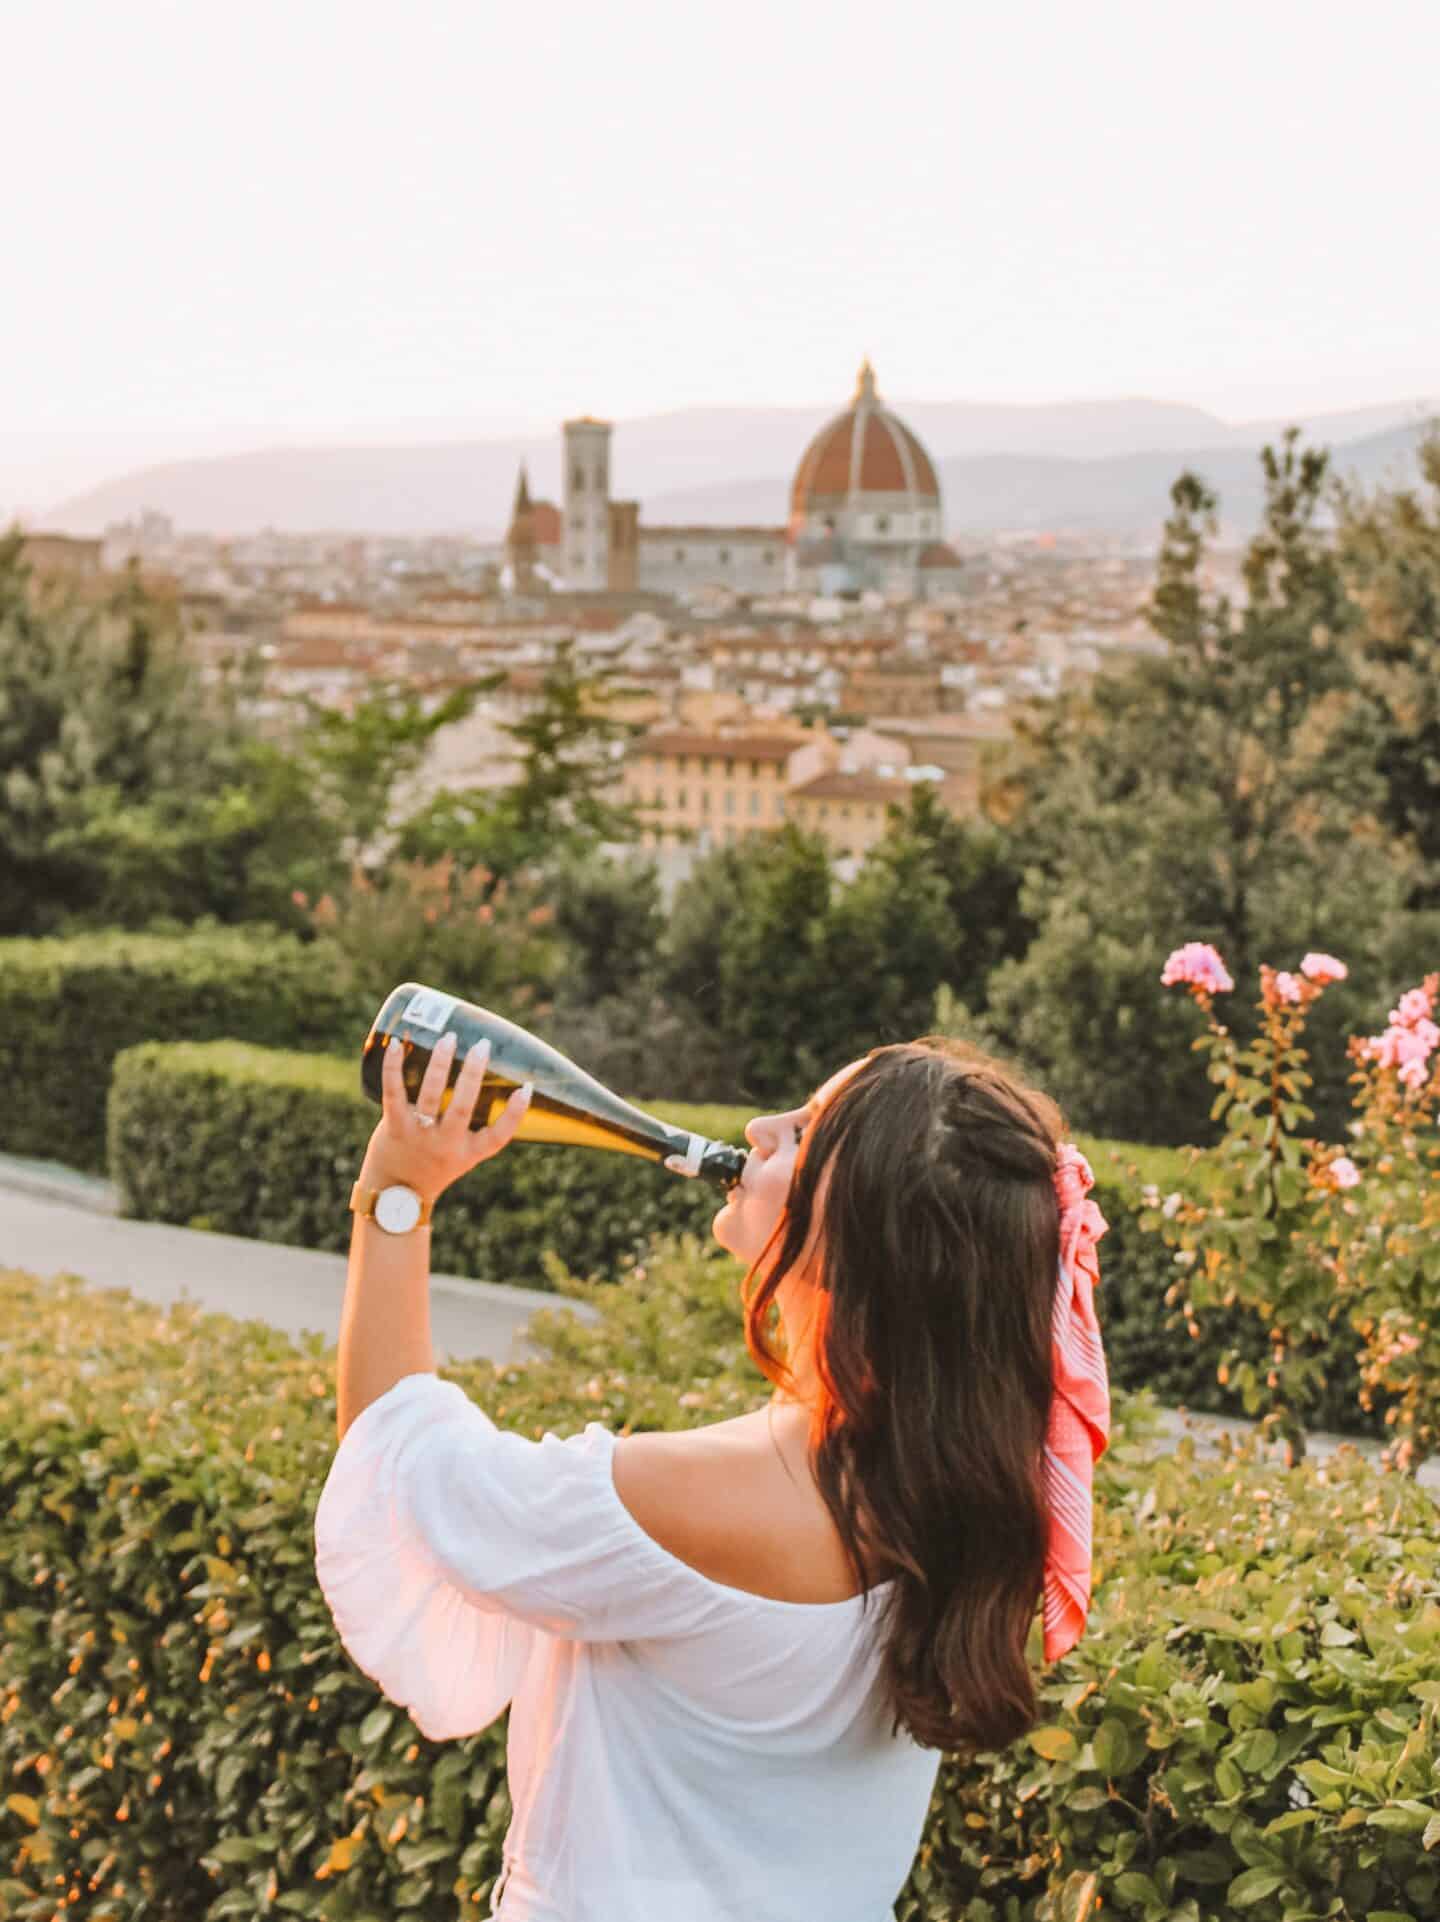 Me sipping prosecco out of the bottle at Piazzale Michelangelo in Florence. 